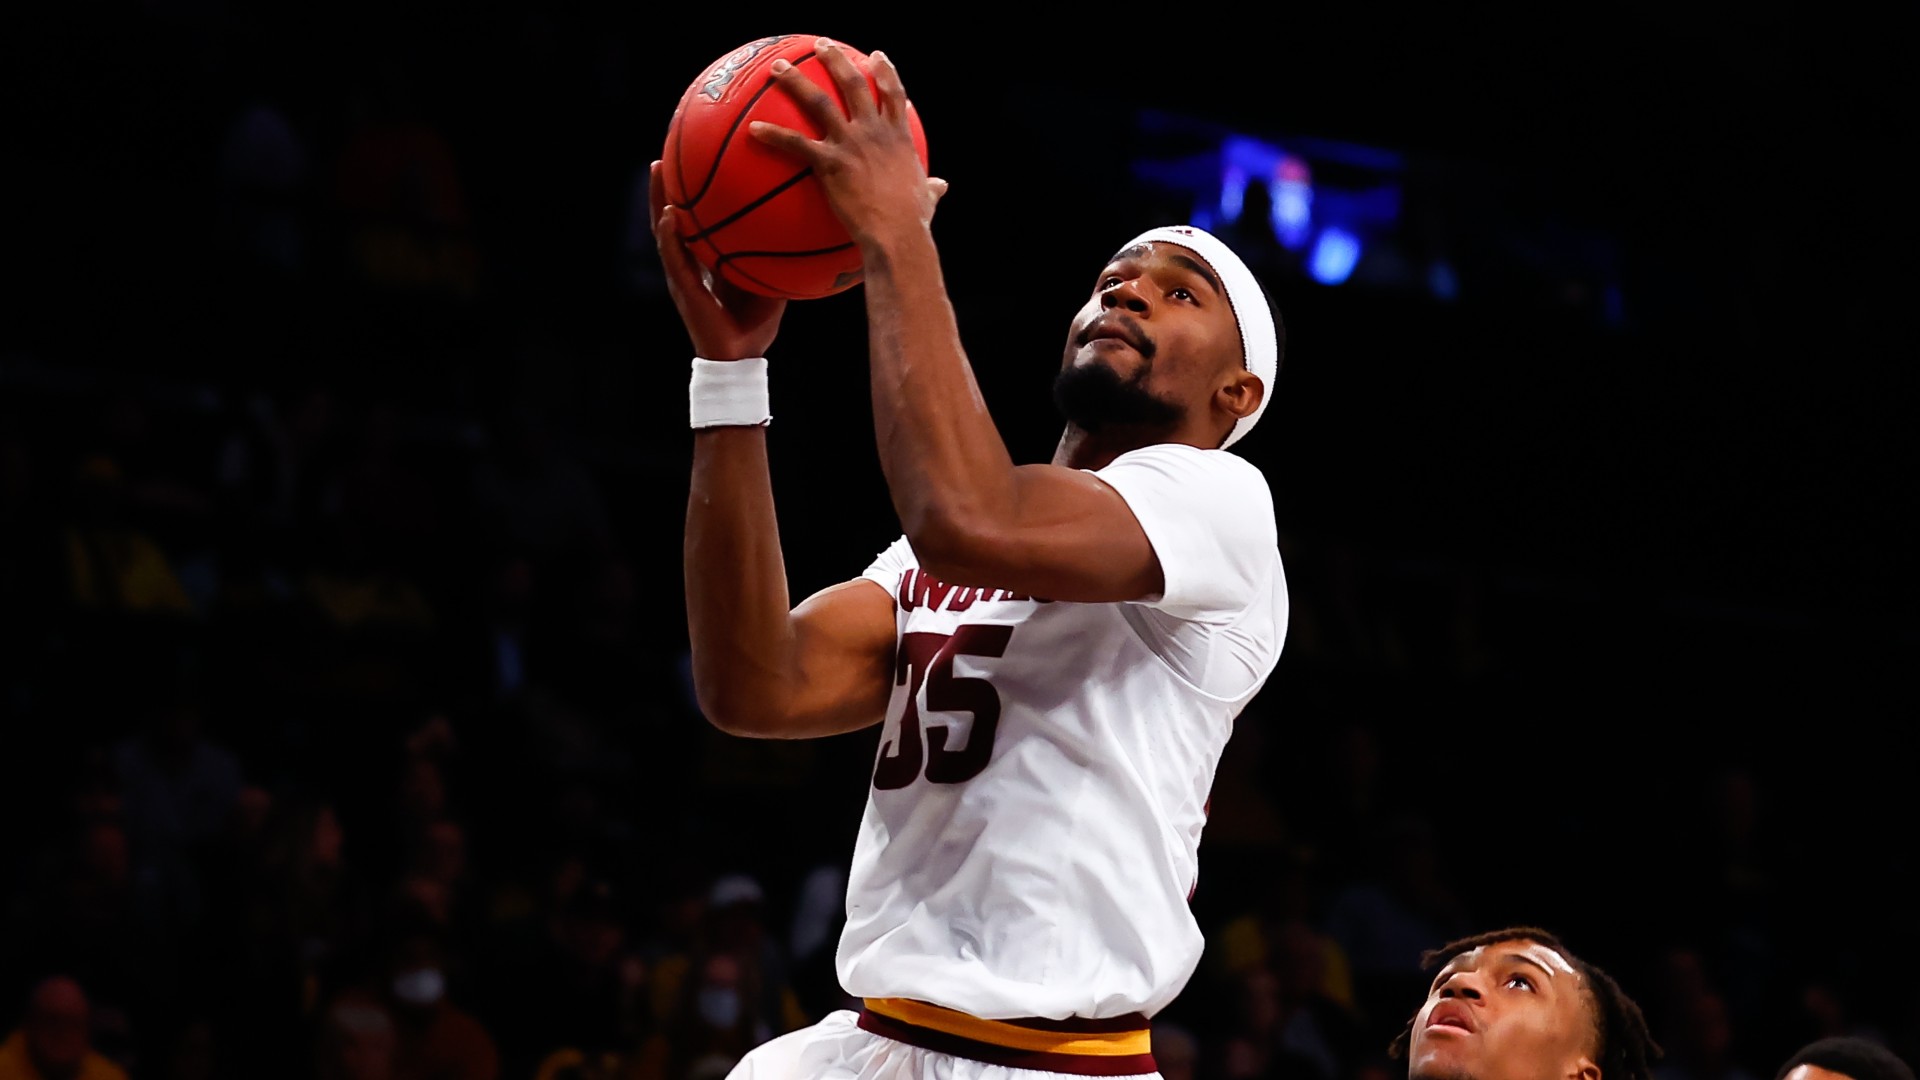 Arizona State vs Creighton College Basketball Odds, Picks, Predictions article feature image